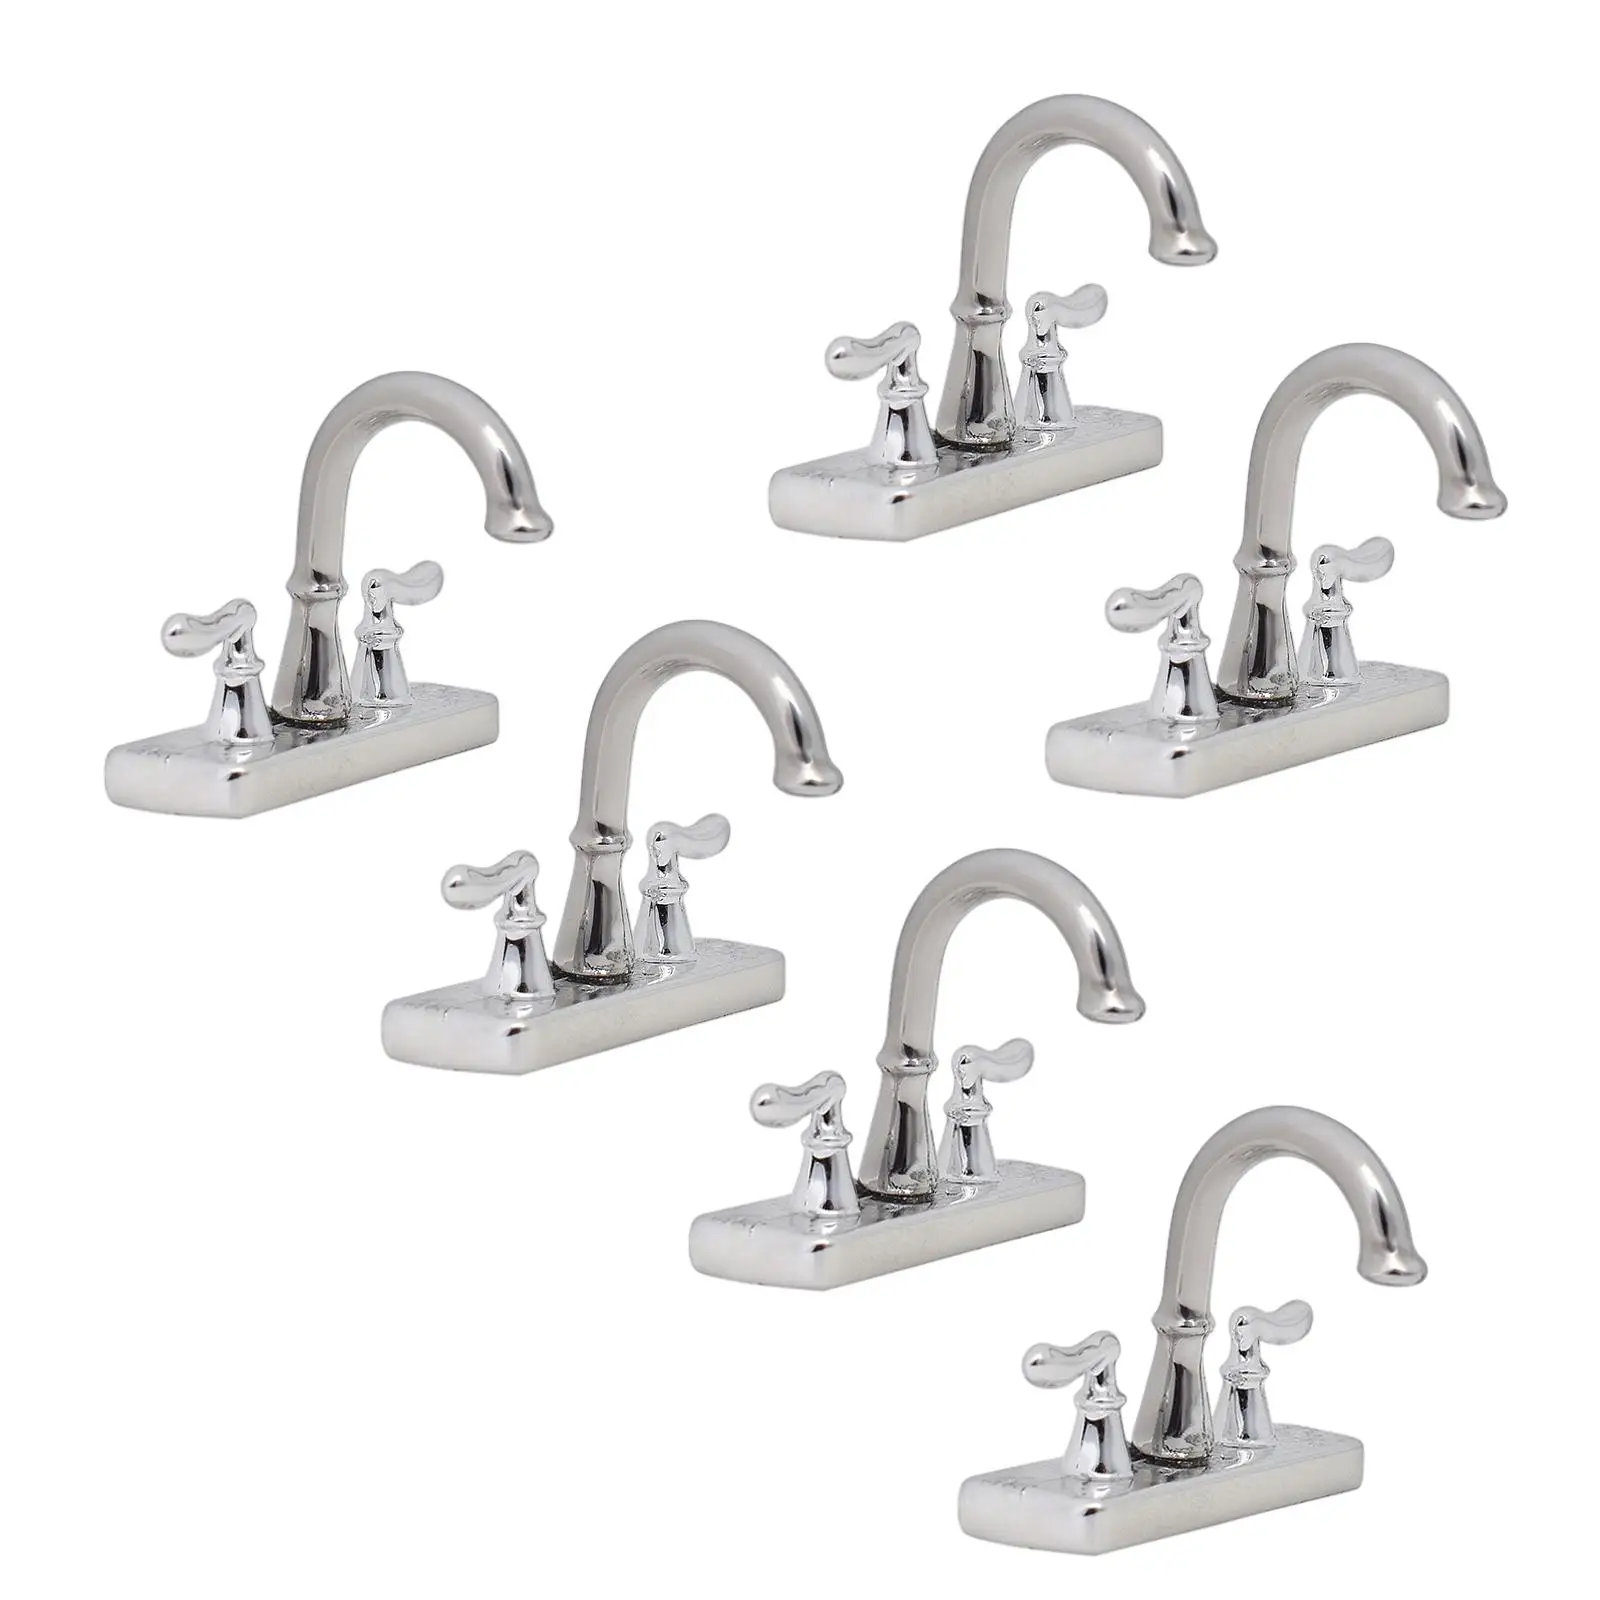 6 Pieces Simulated Double Opener Faucet Photography Props :12 Scale  for Doll   Children